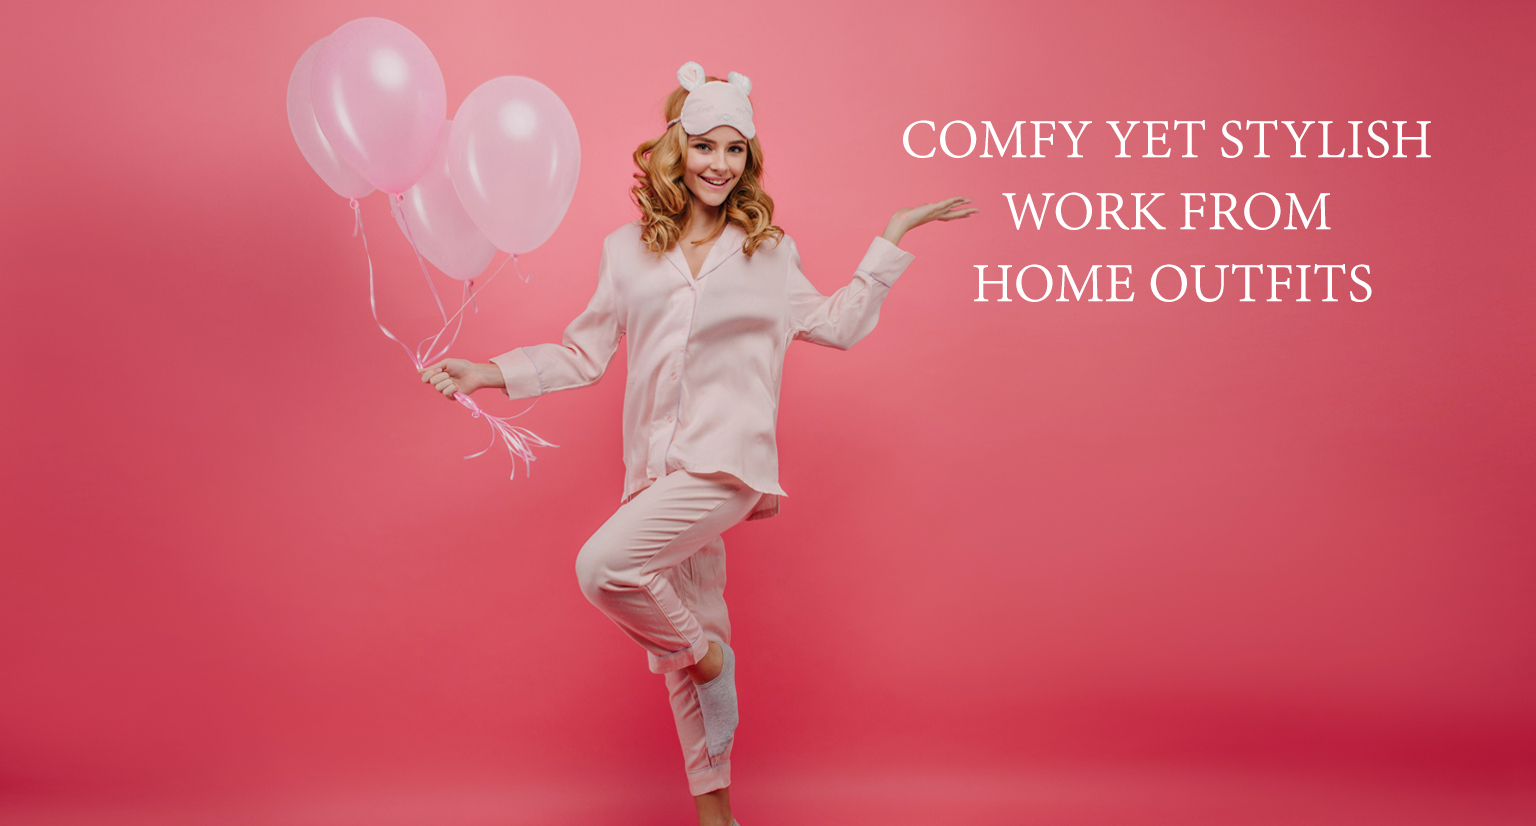 Work From Home Outfits for Women